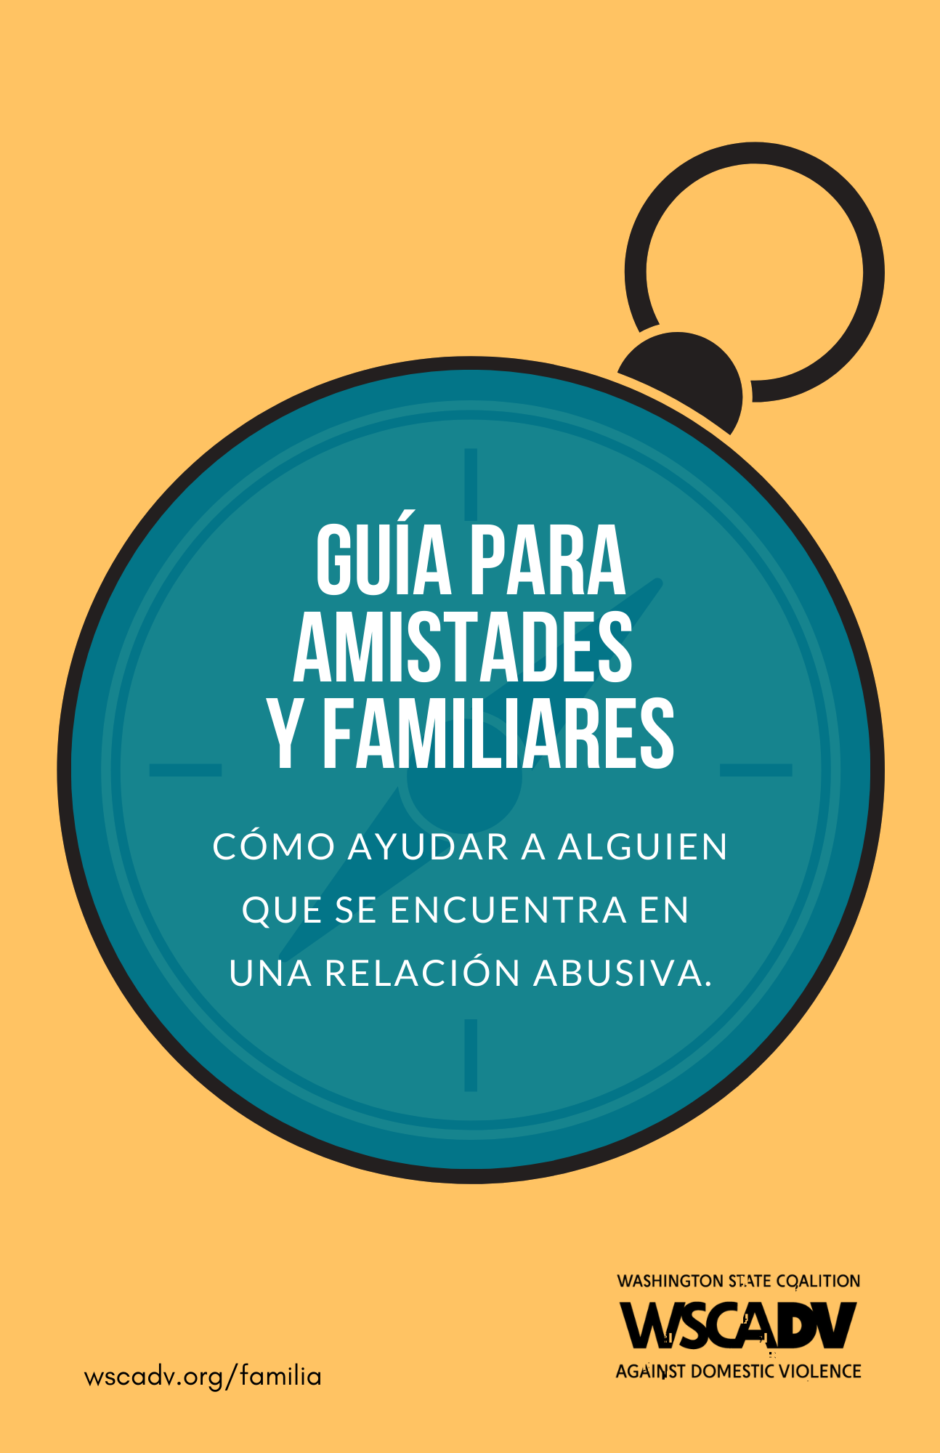 Cover of the Spanish Friends & Family Guide: Guía-para-amistades-y-familiares. There is a blue compass over a yellow background and white text.